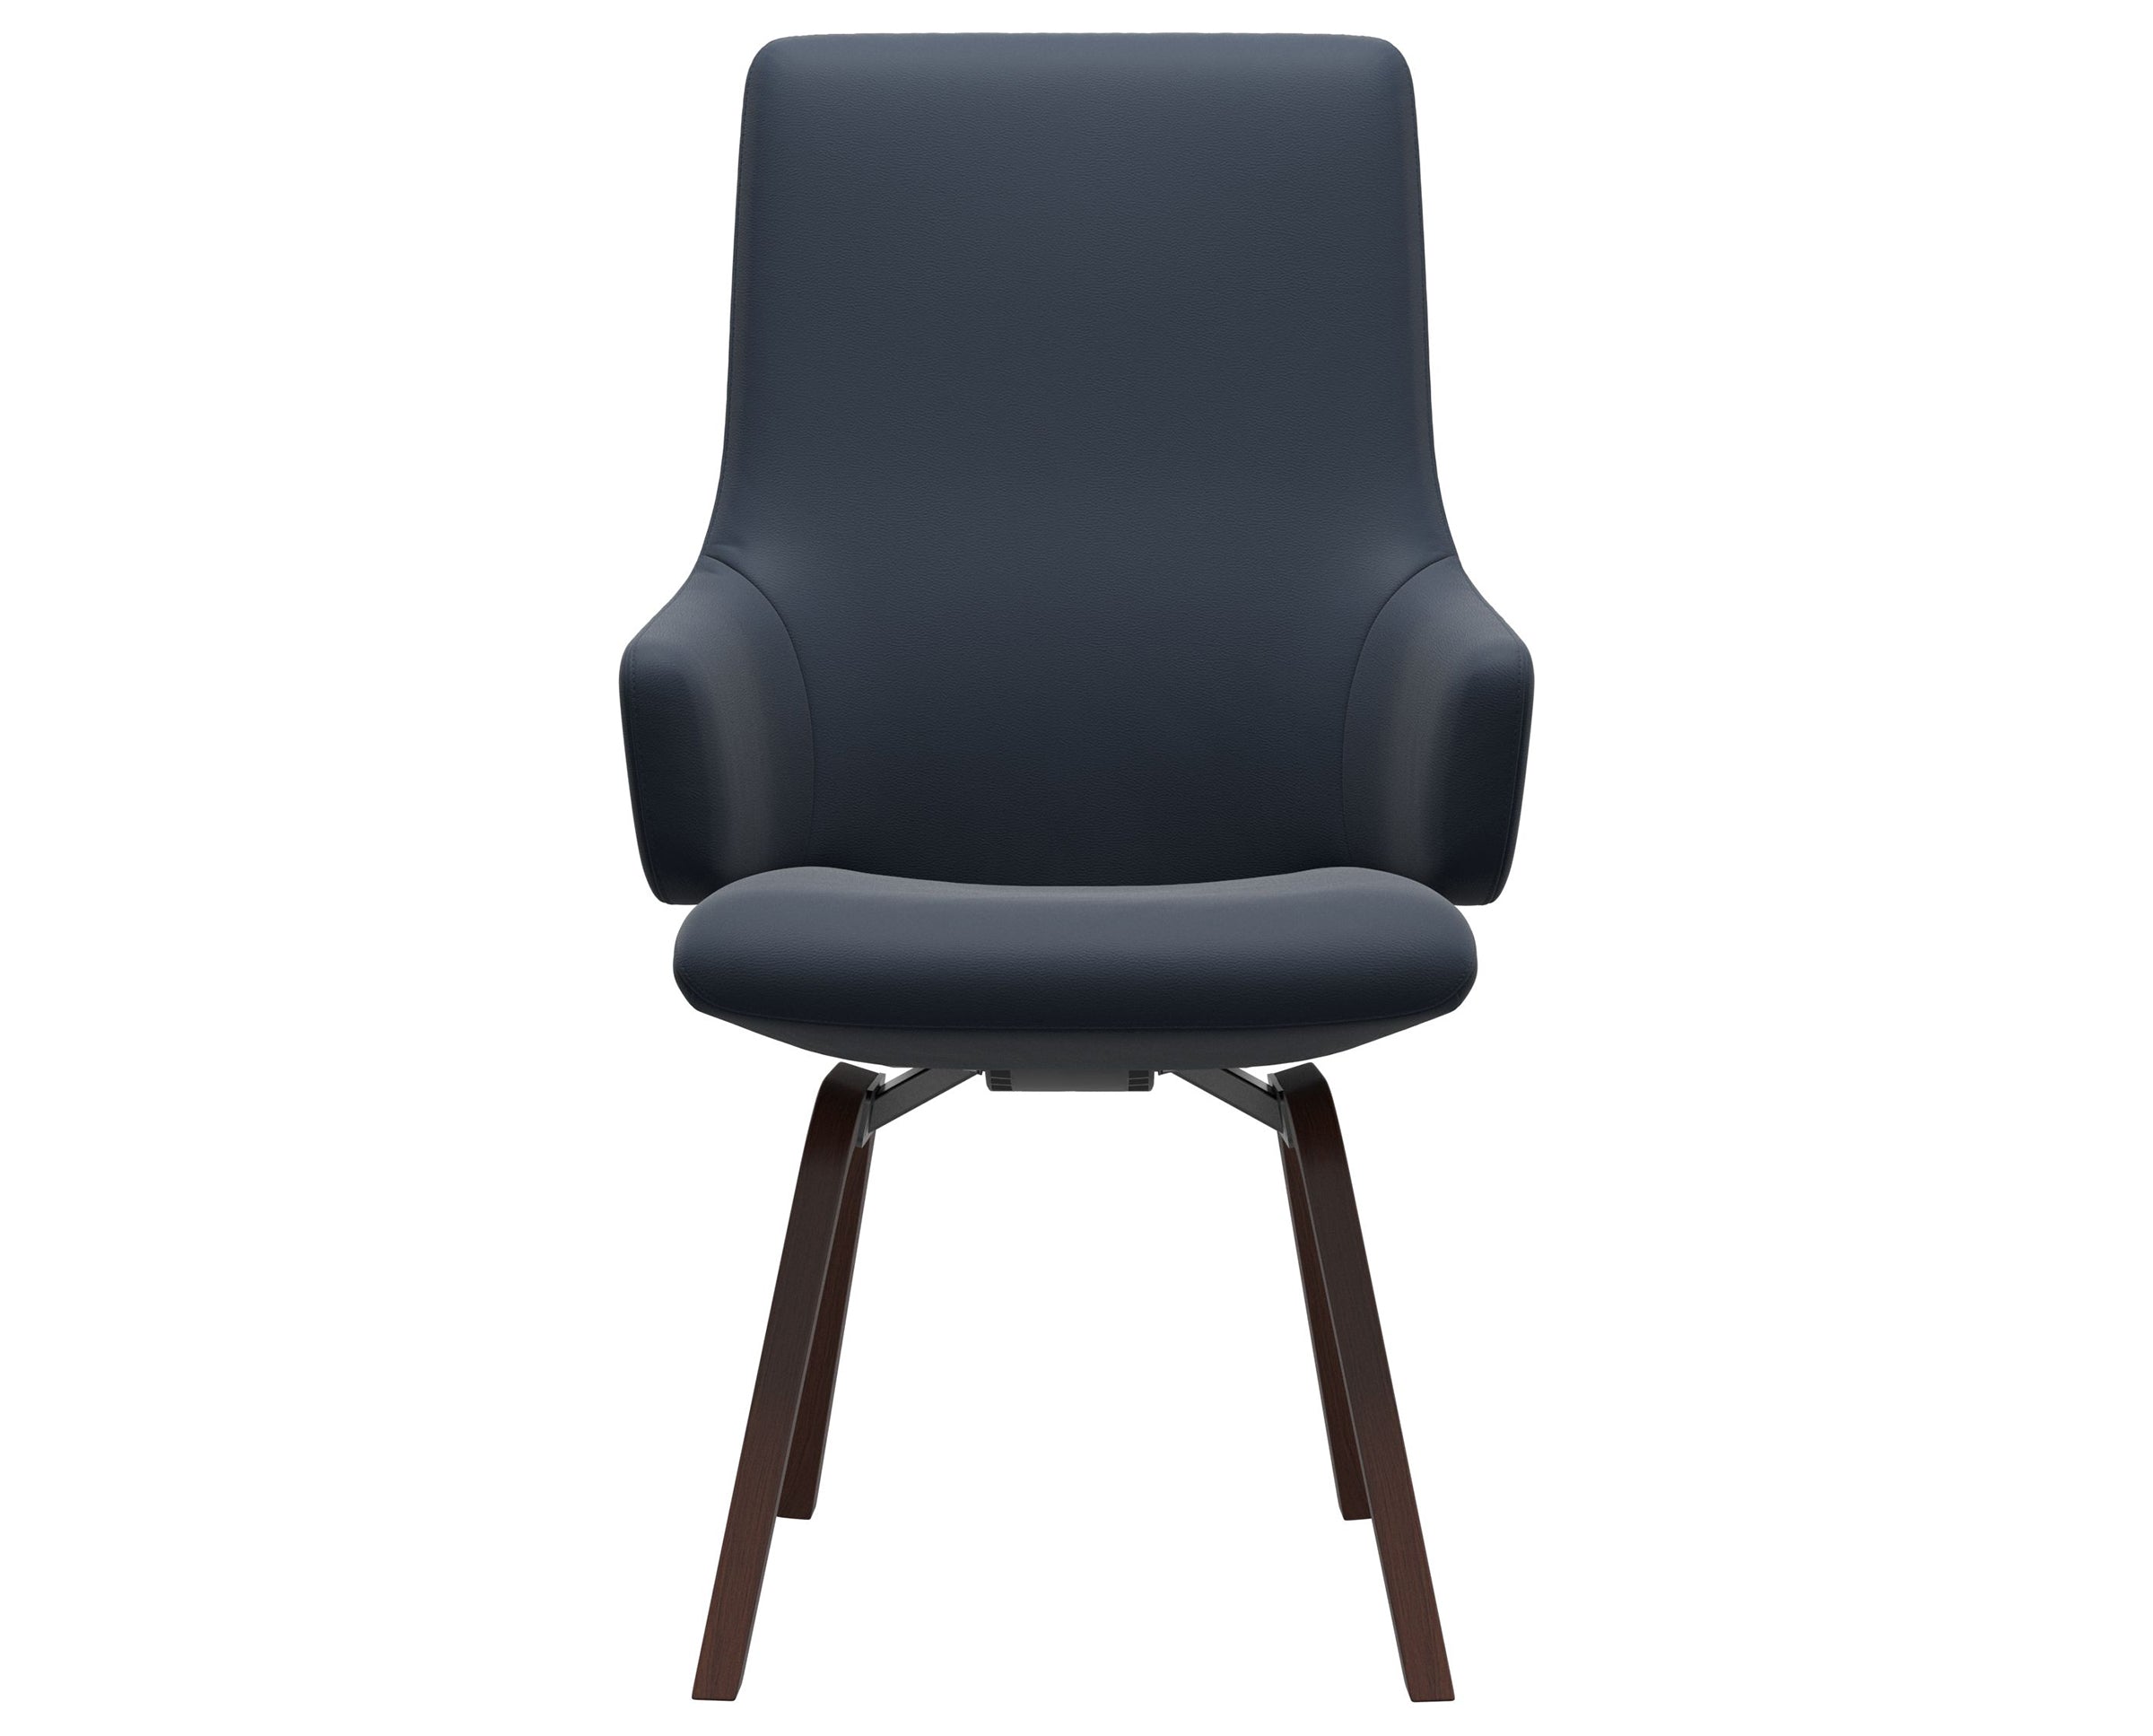 Paloma Leather Oxford Blue and Walnut Base | Stressless Laurel High Back D200 Dining Chair w/Arms | Valley Ridge Furniture